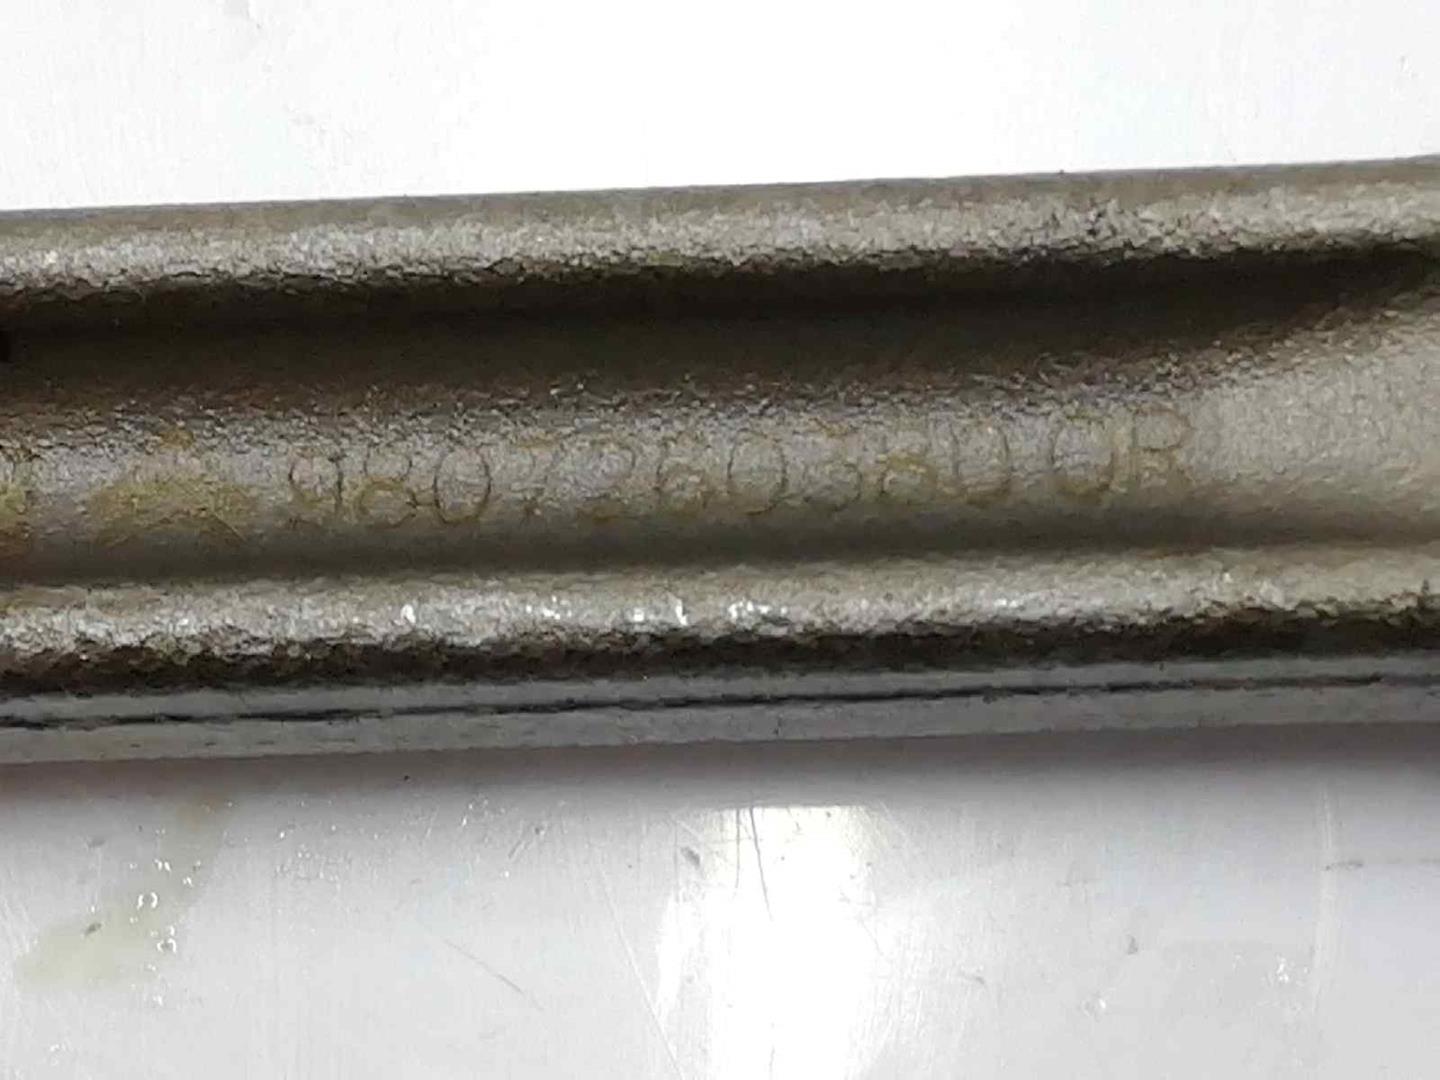 PEUGEOT 308 T9 (2013-2021) Connecting Rod 1610806380, 1610806380 19752978